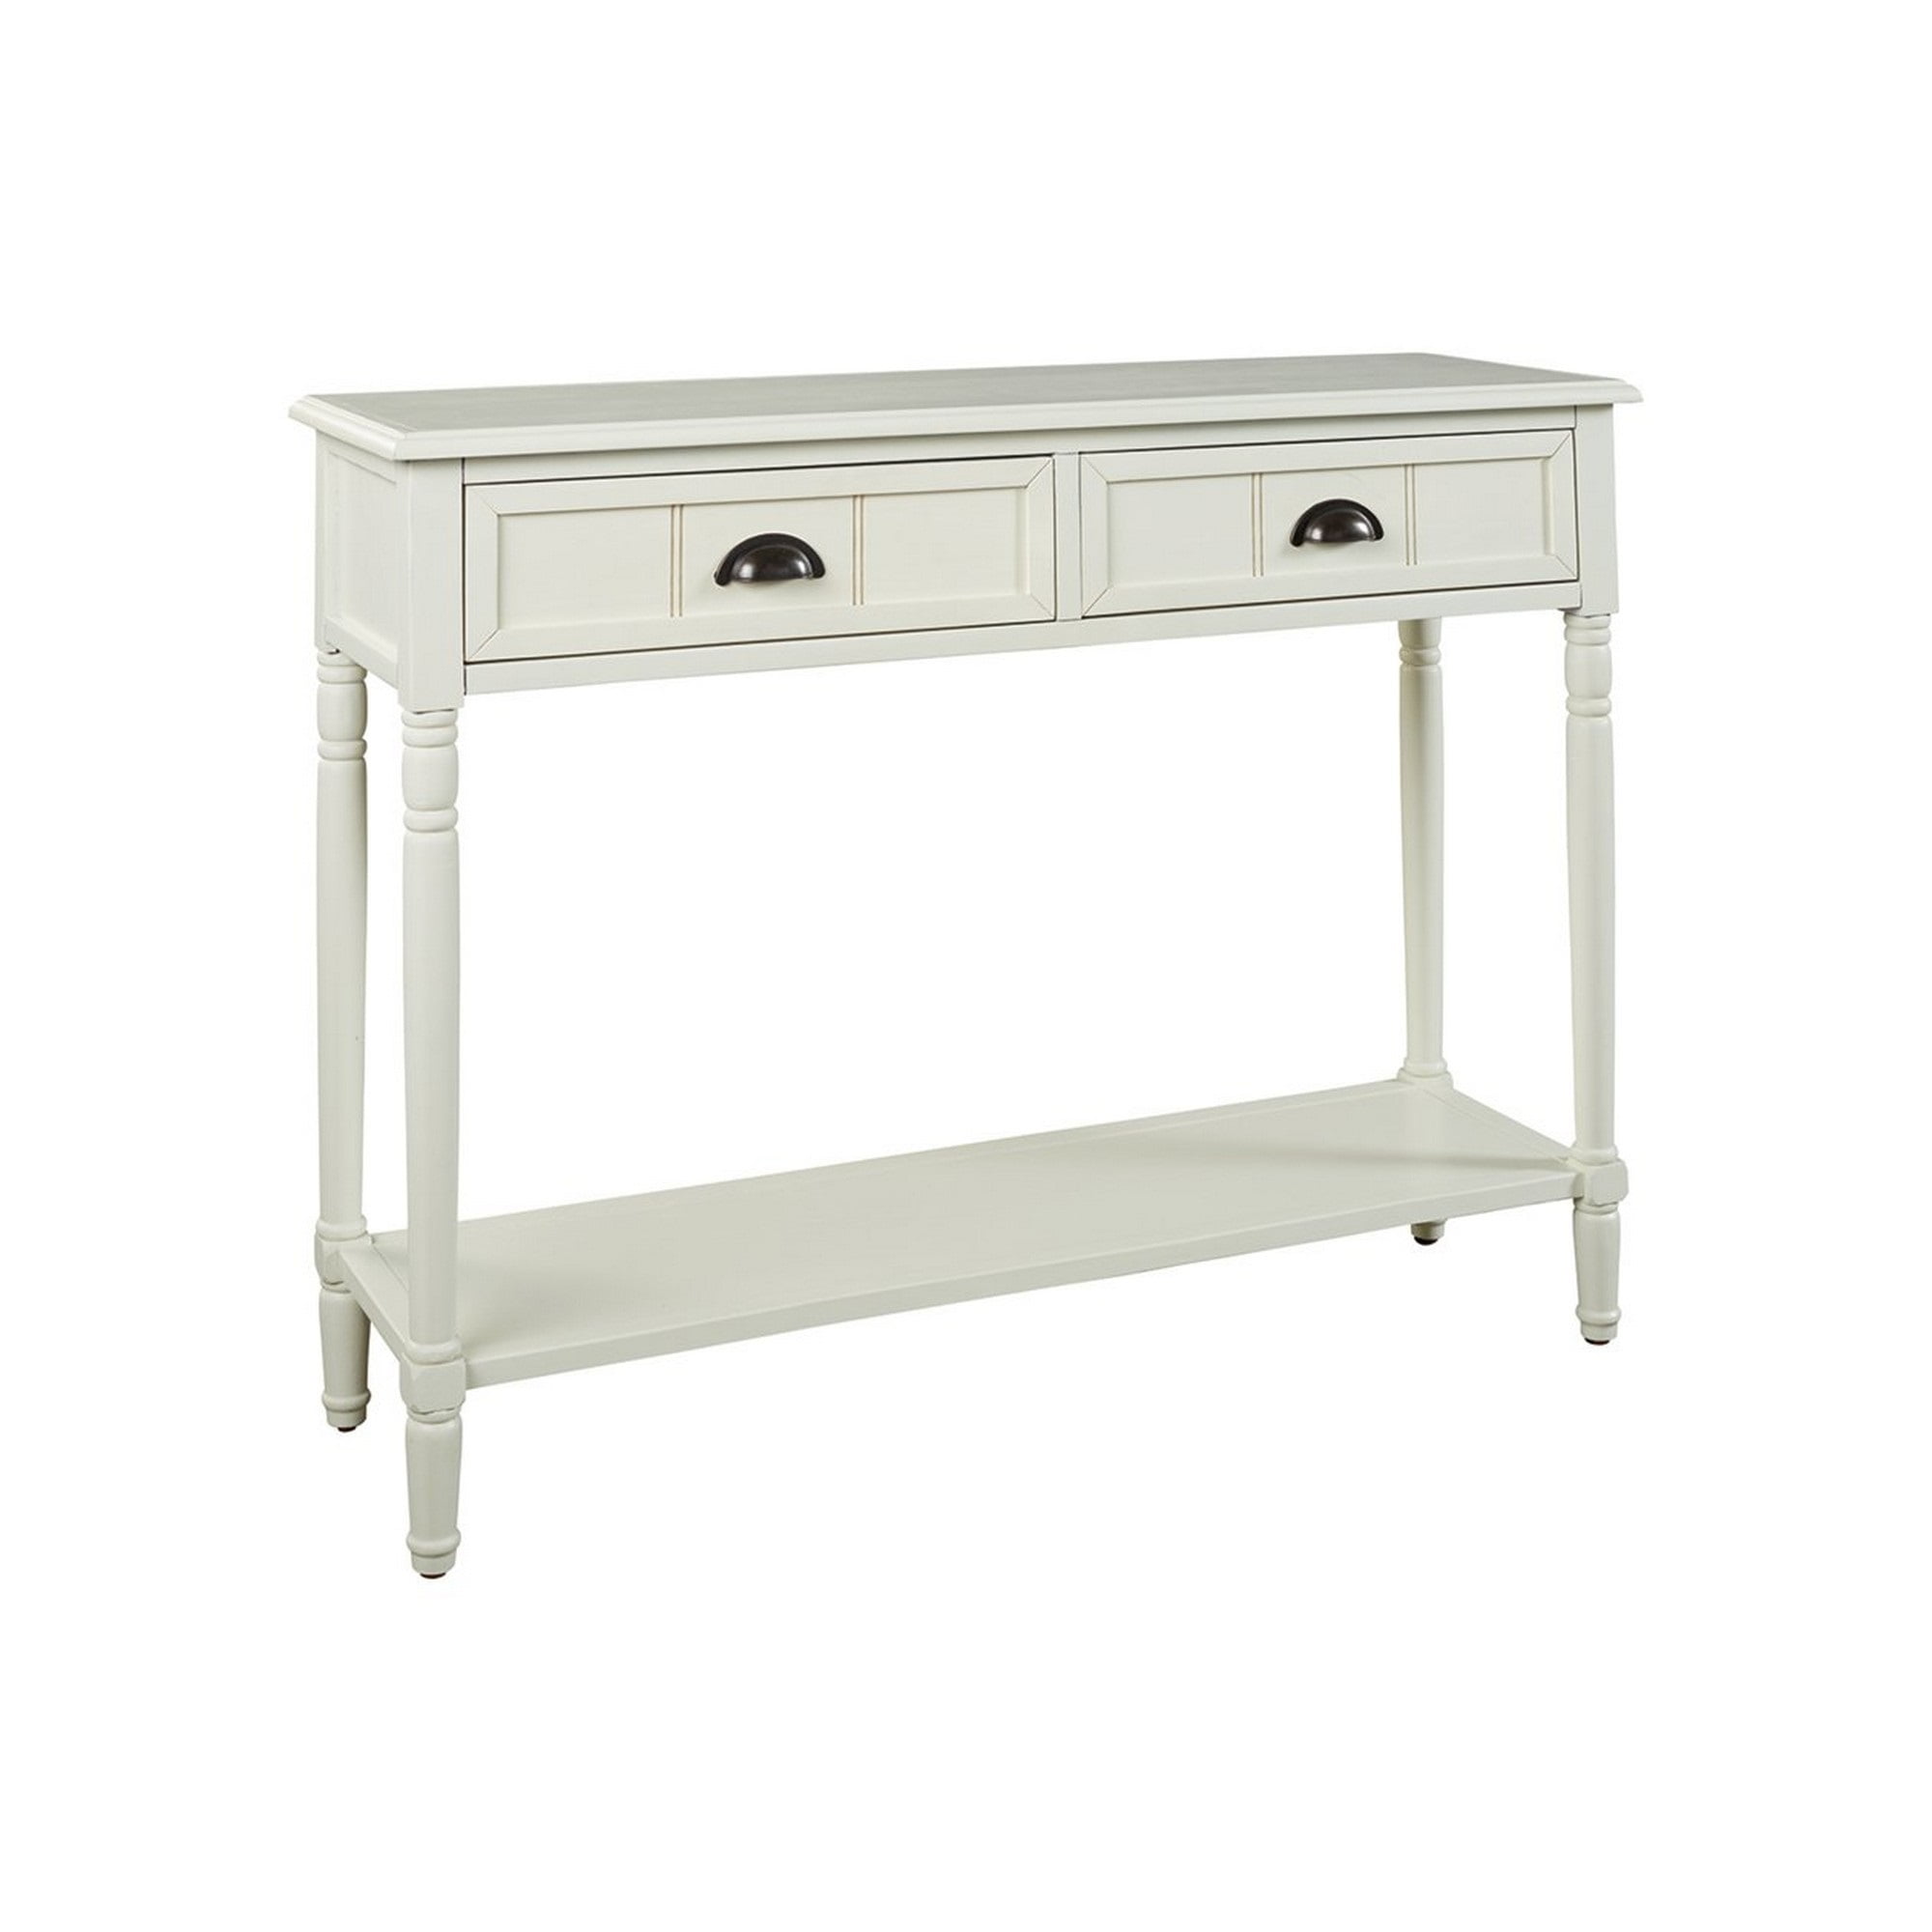 2 Drawer Console Sofa Table with Cup Pulls and Turned Legs, White